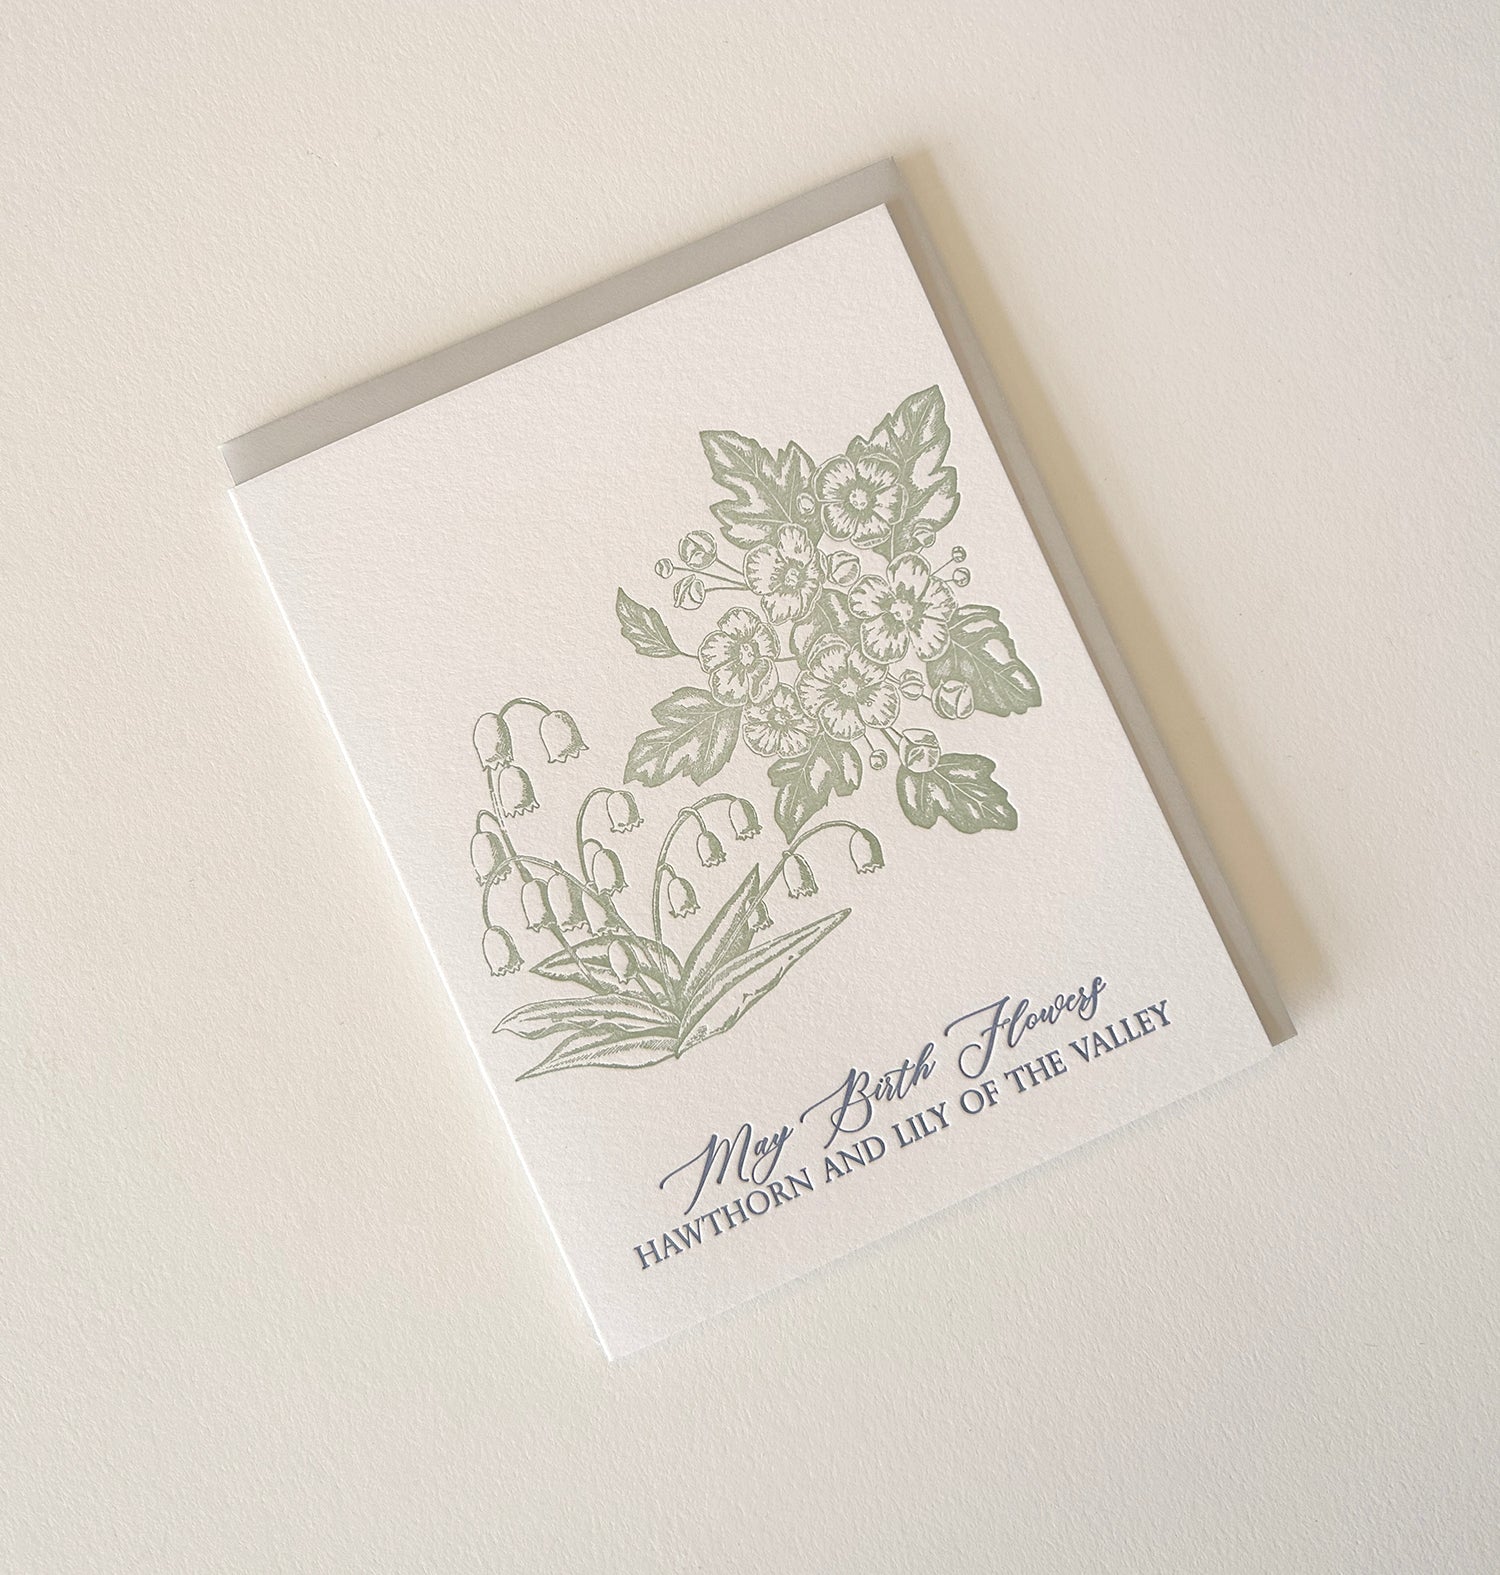 Letterpress birthday card with florals that says "May birth flowers hawthorn and lily of the valley" by Rust Belt Love